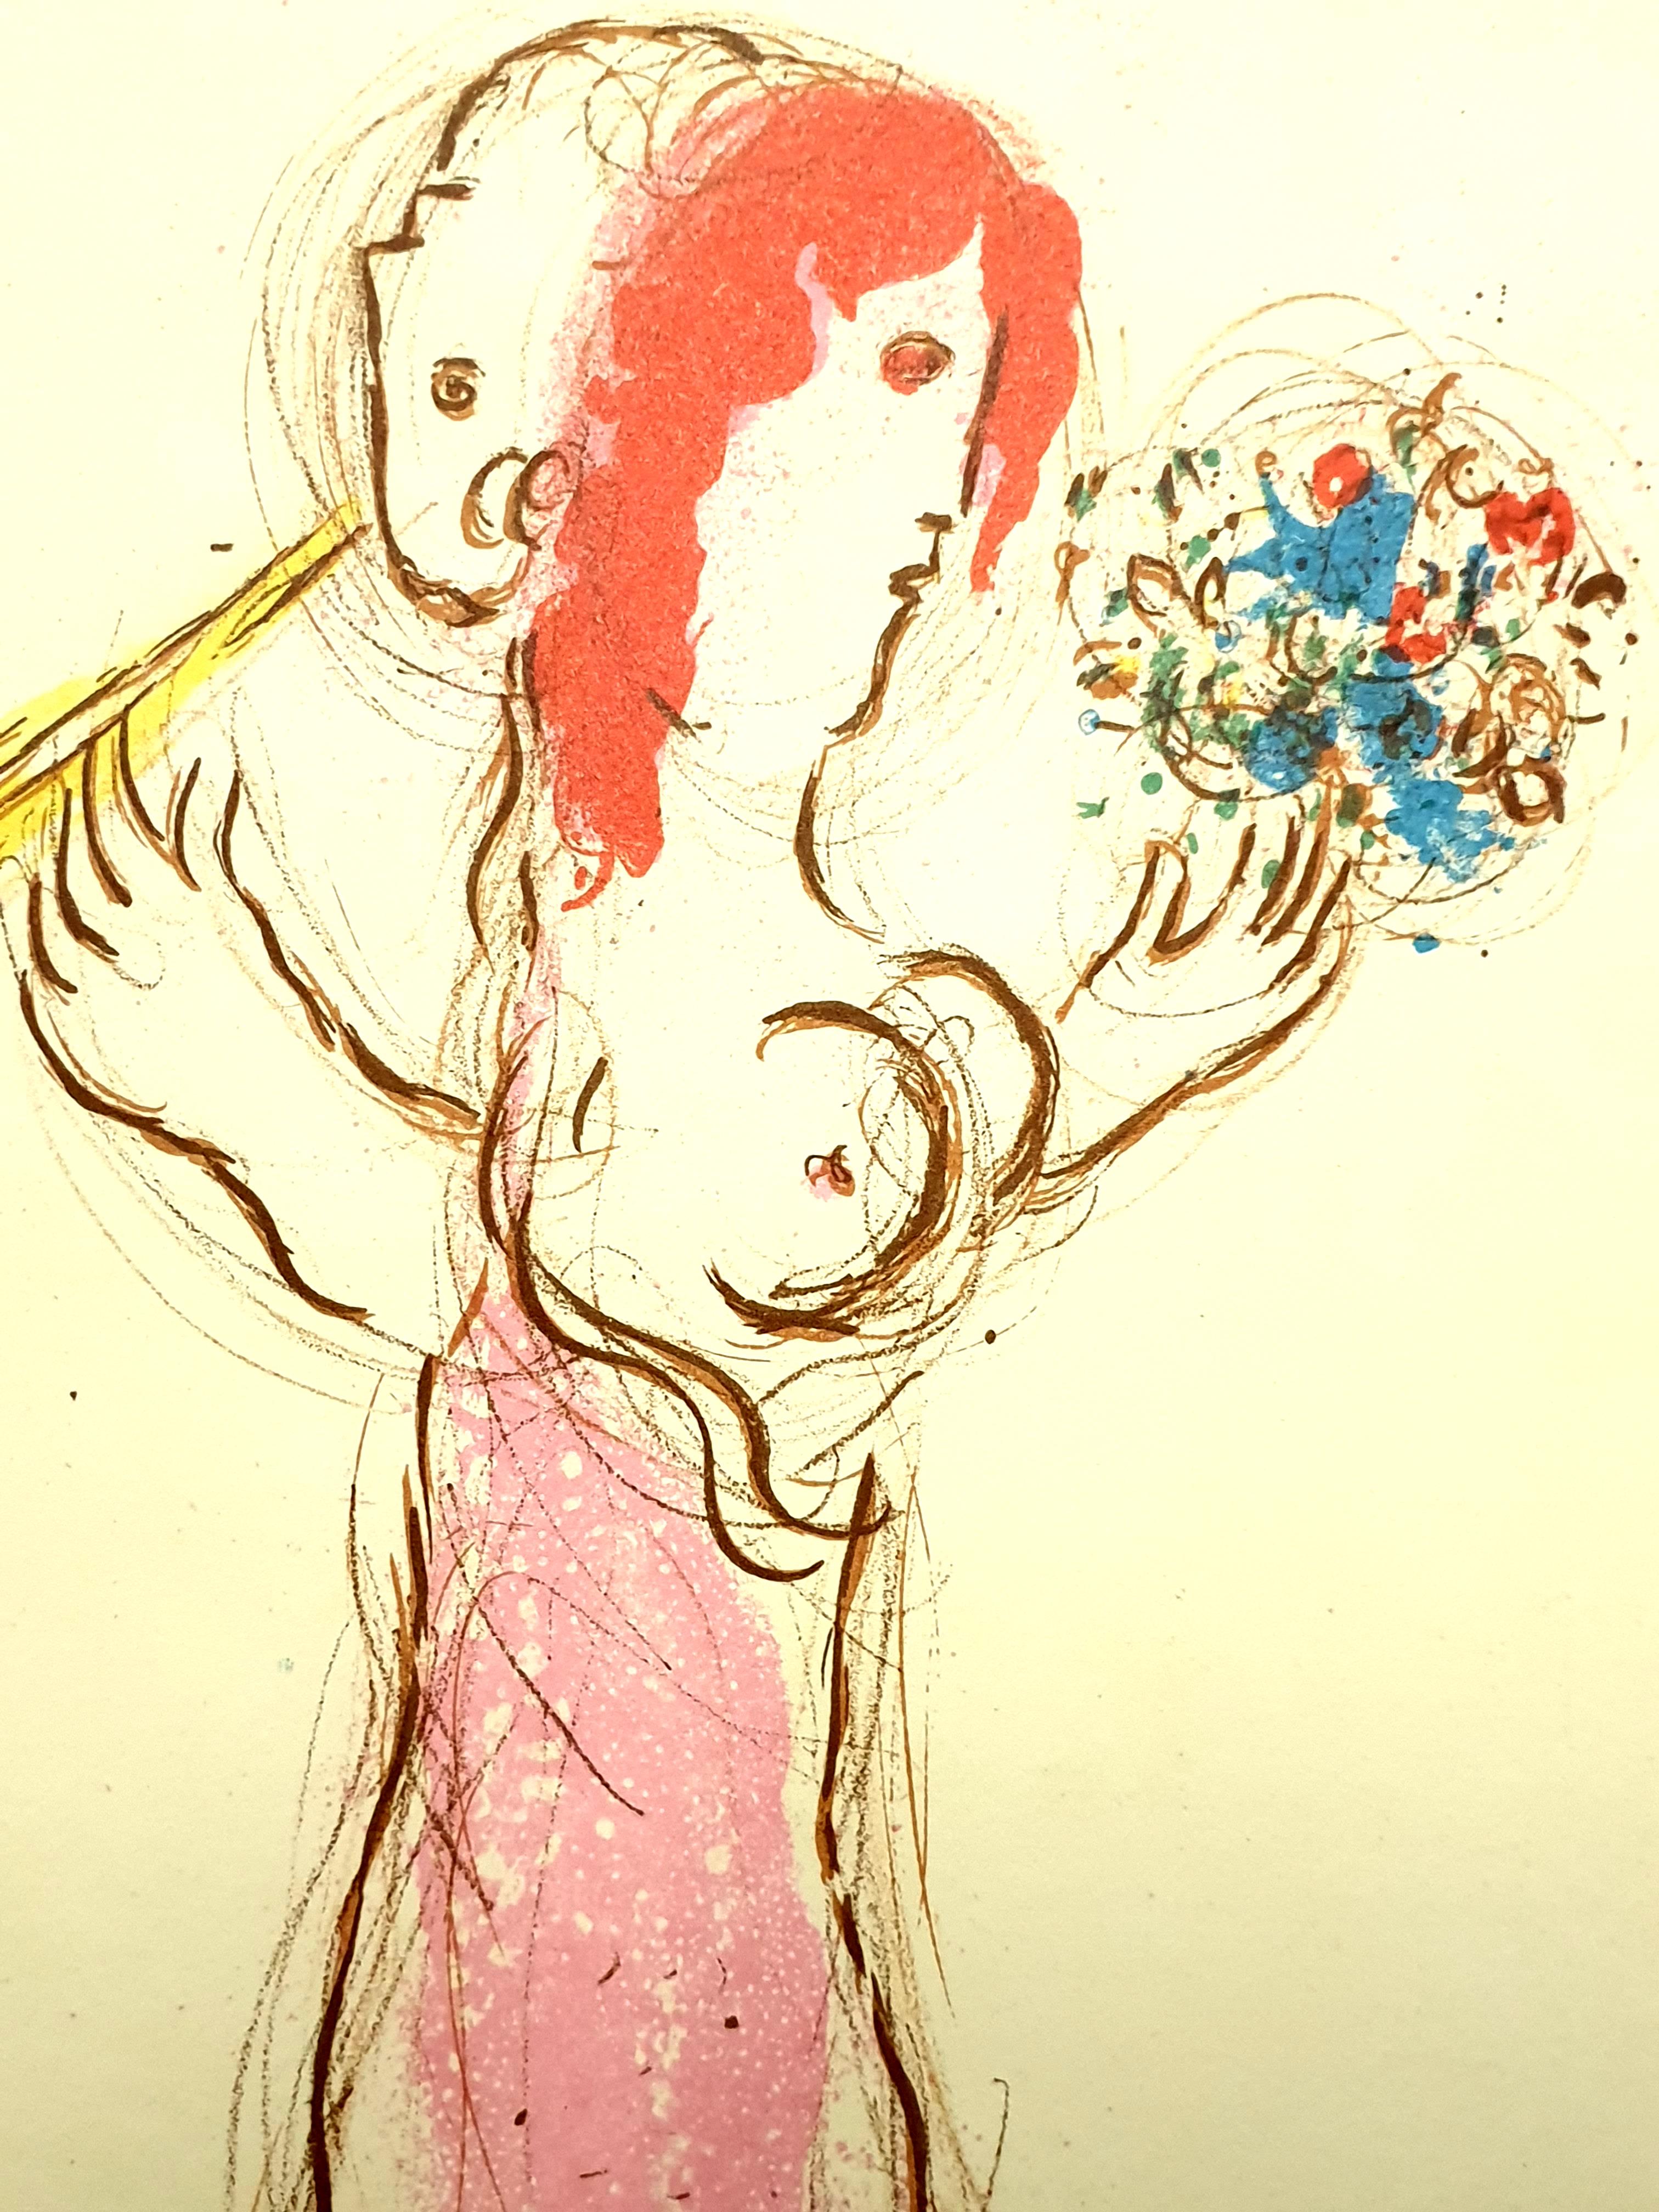 Marc Chagall - Daphnis and Chloé - Original Lithograph
From the literary review 